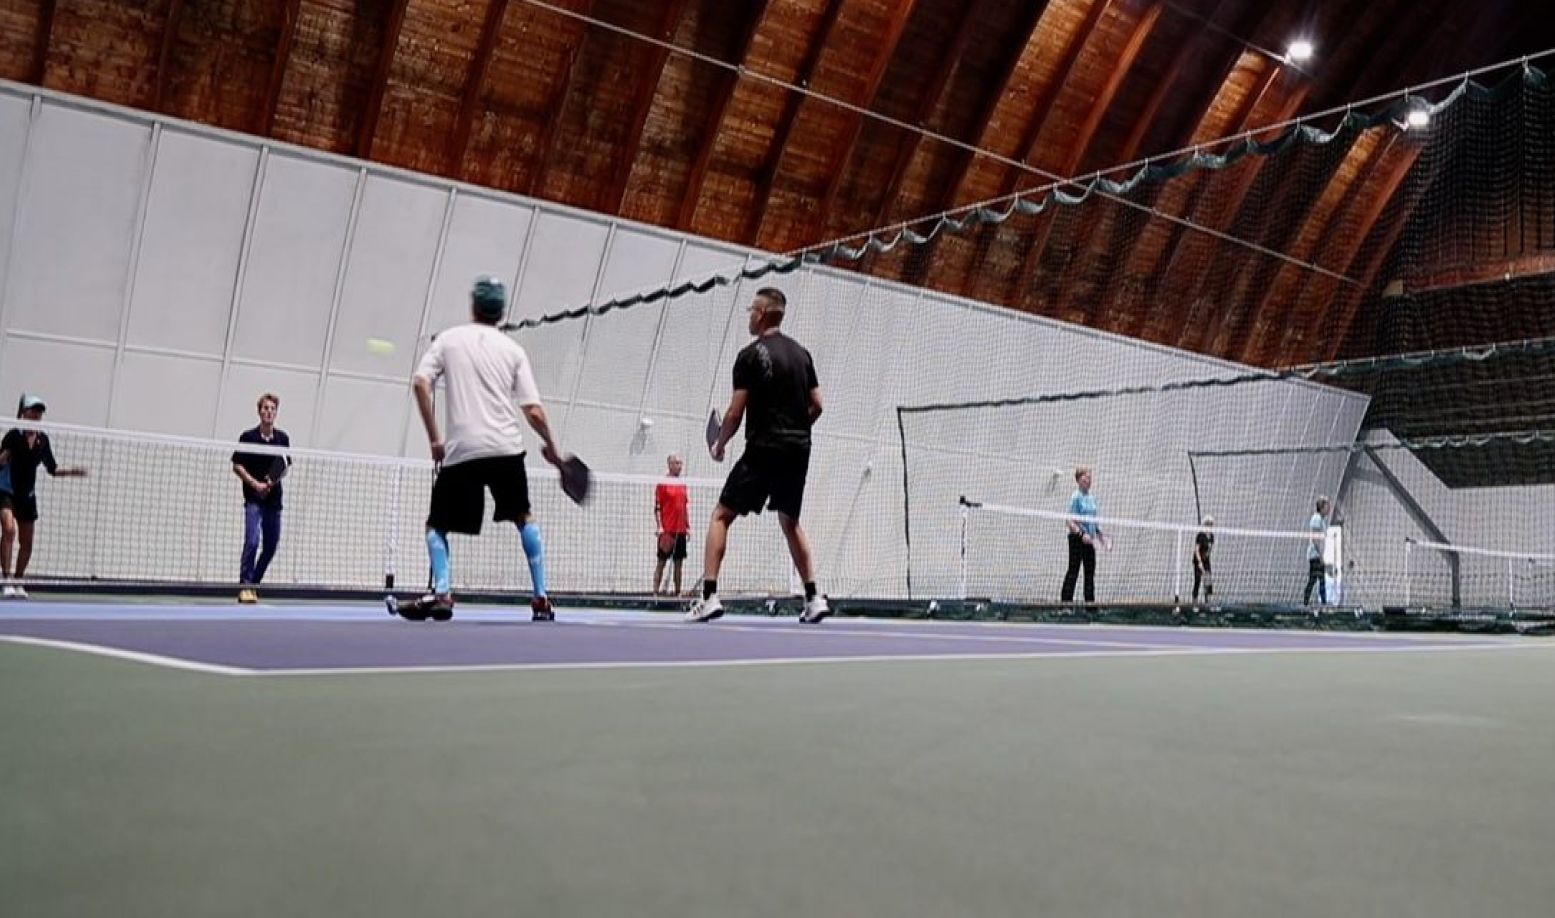 People playing pickleball on a pickleball court